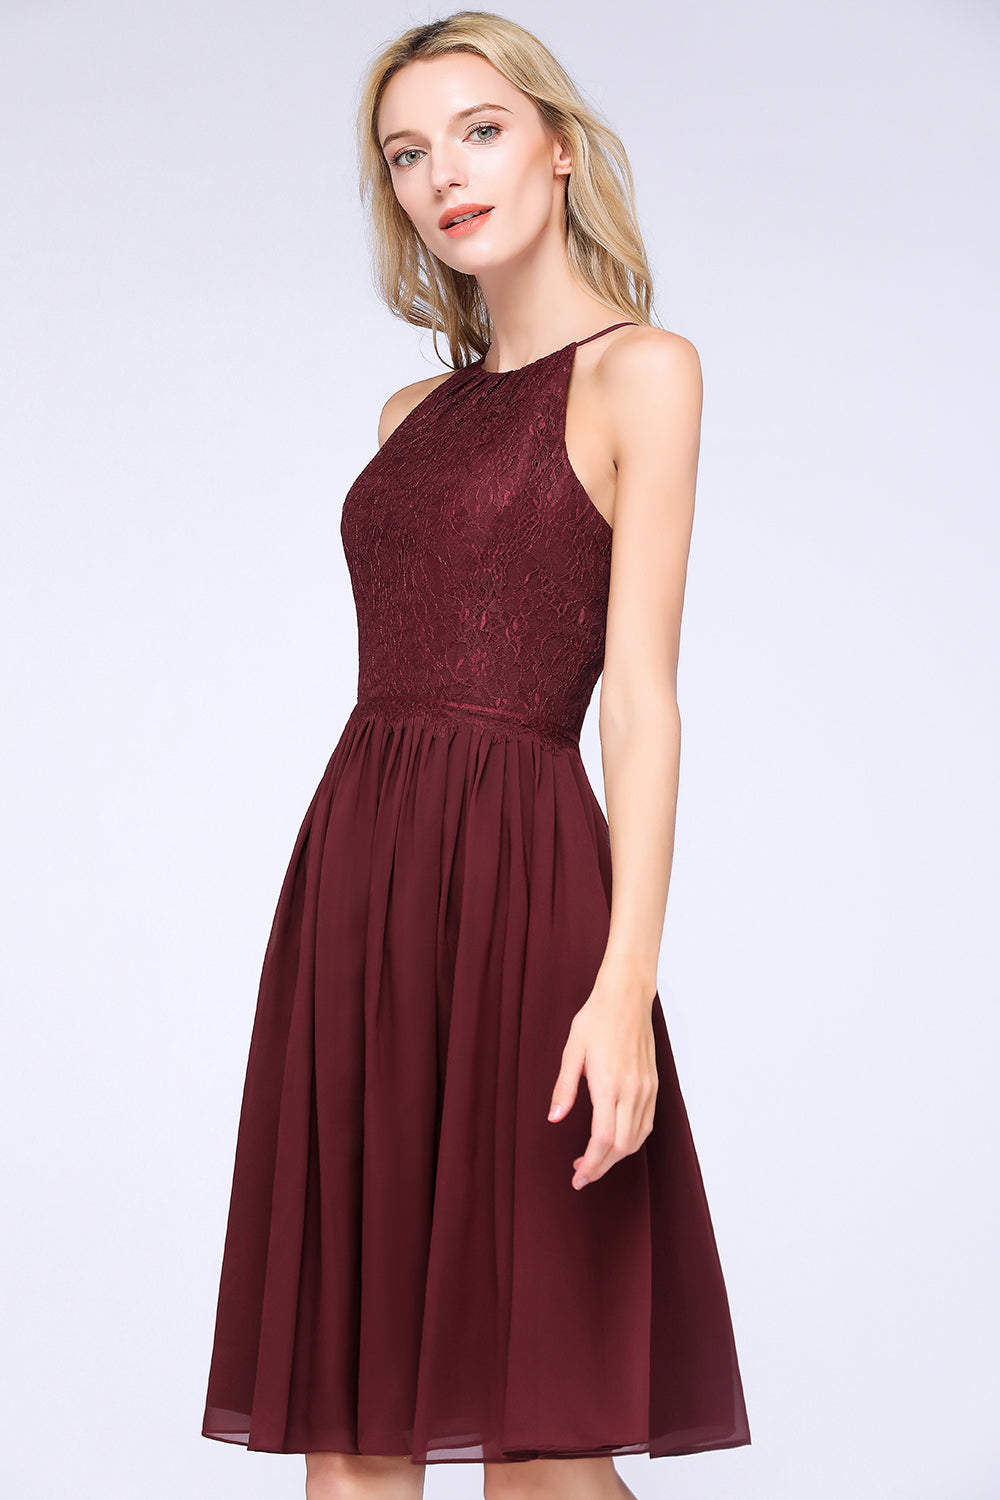 Lovely Burgundy Lace Short Bridesmaid Dress With Spaghetti-Straps-27dress